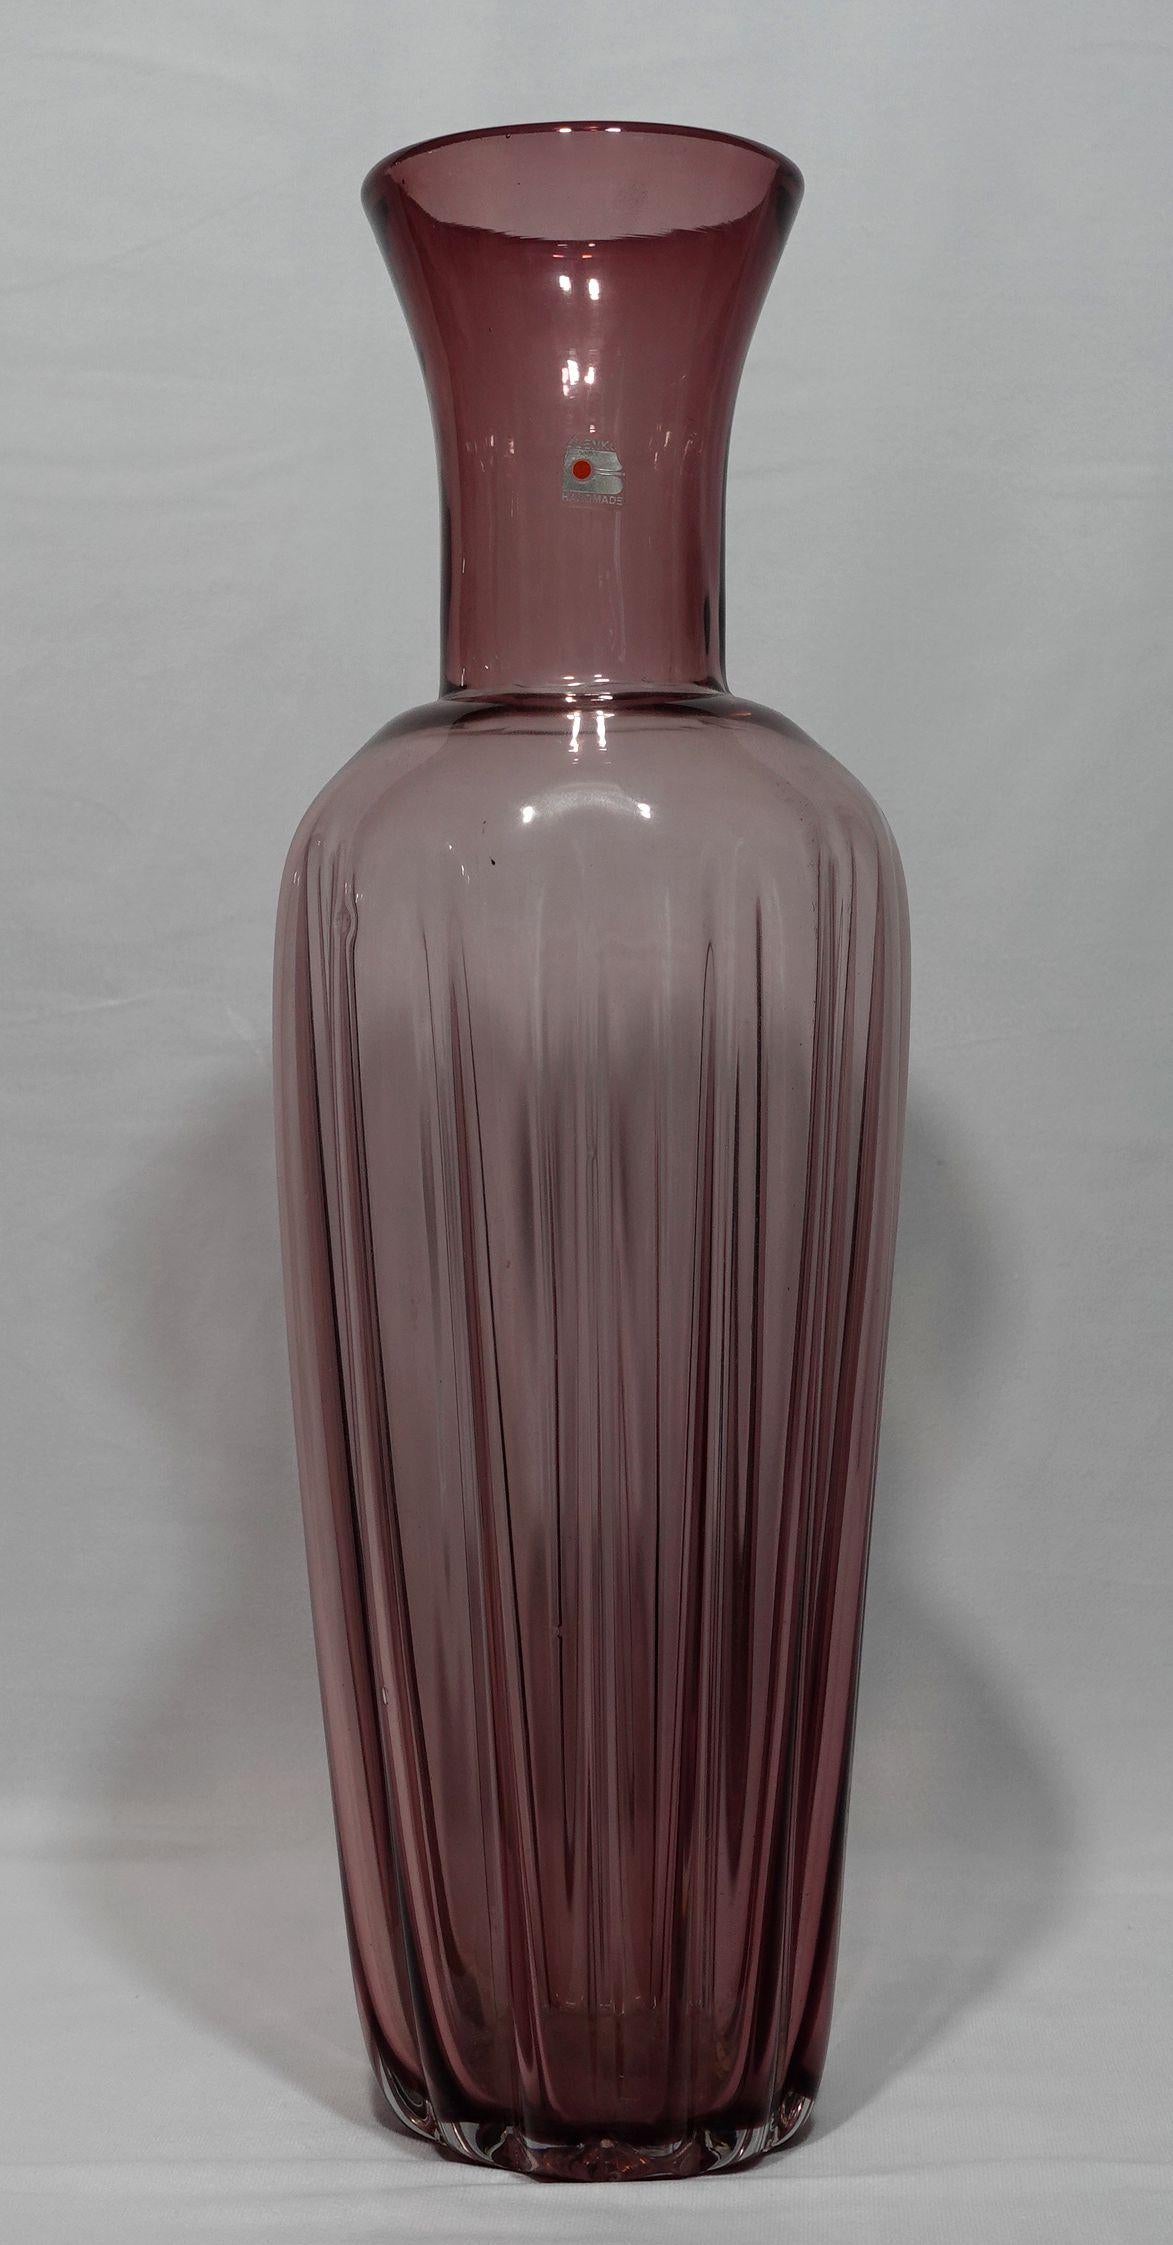 A Large Blenko Handblown Tall Purple Ribbed Glass Vase 1970, Milton, West Virginia, c 1970

Gorgeous tall handblown ribbed vase by Blenko. The ribbed effect adds a lot of depth to this vase as well as the varying contours. Great for tall floral